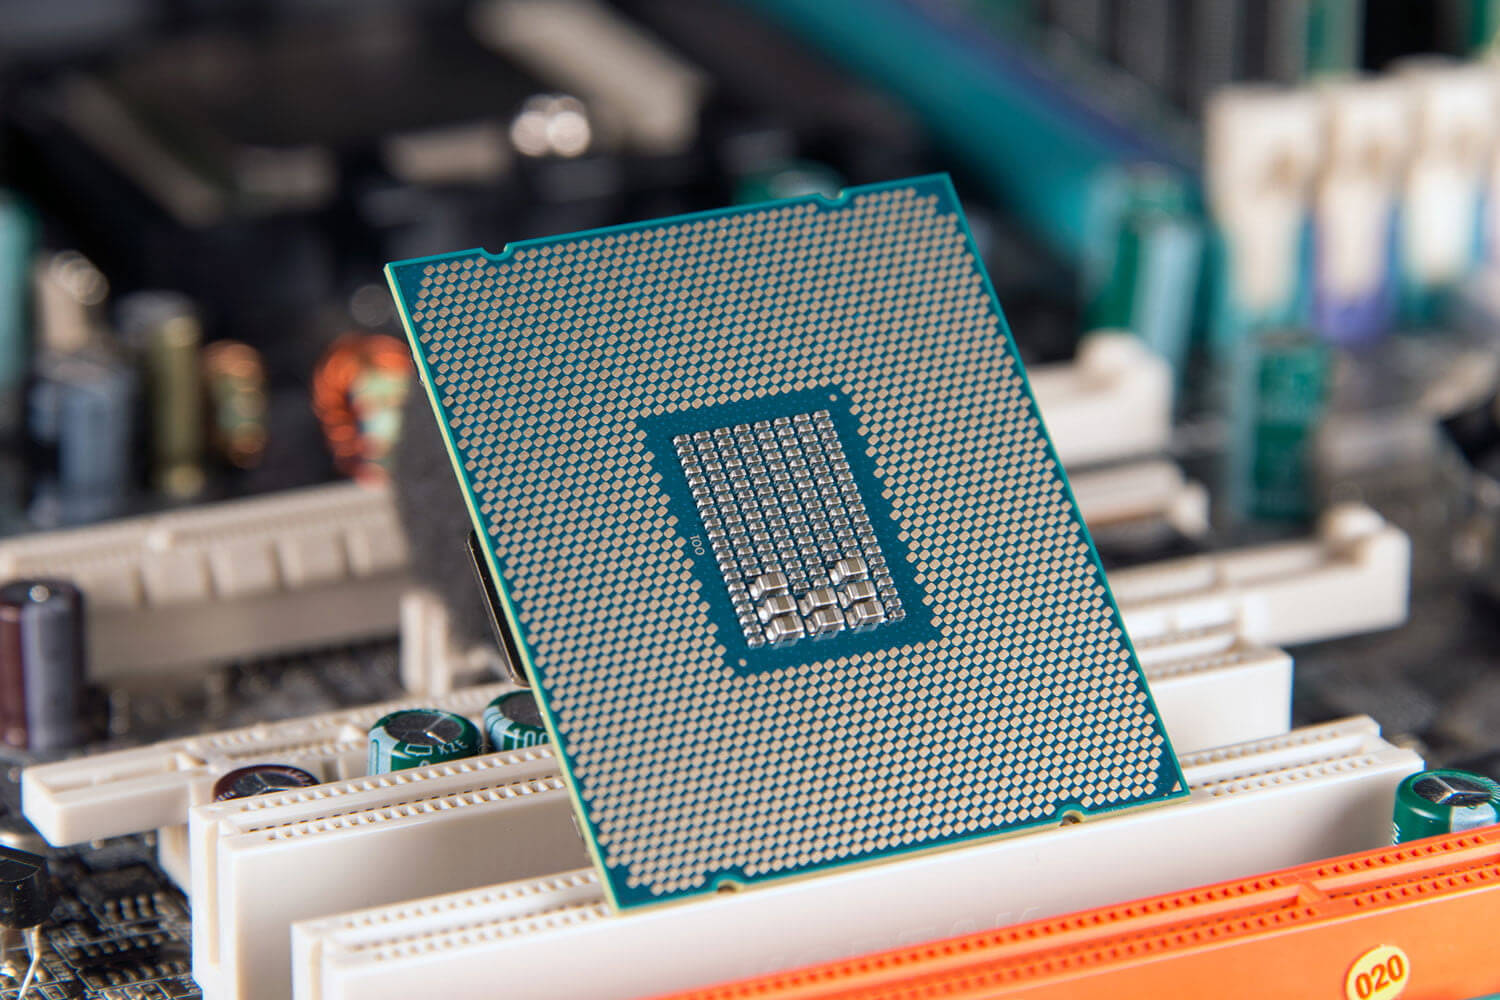 Intel document confirms existence of X399, Z390 chipsets